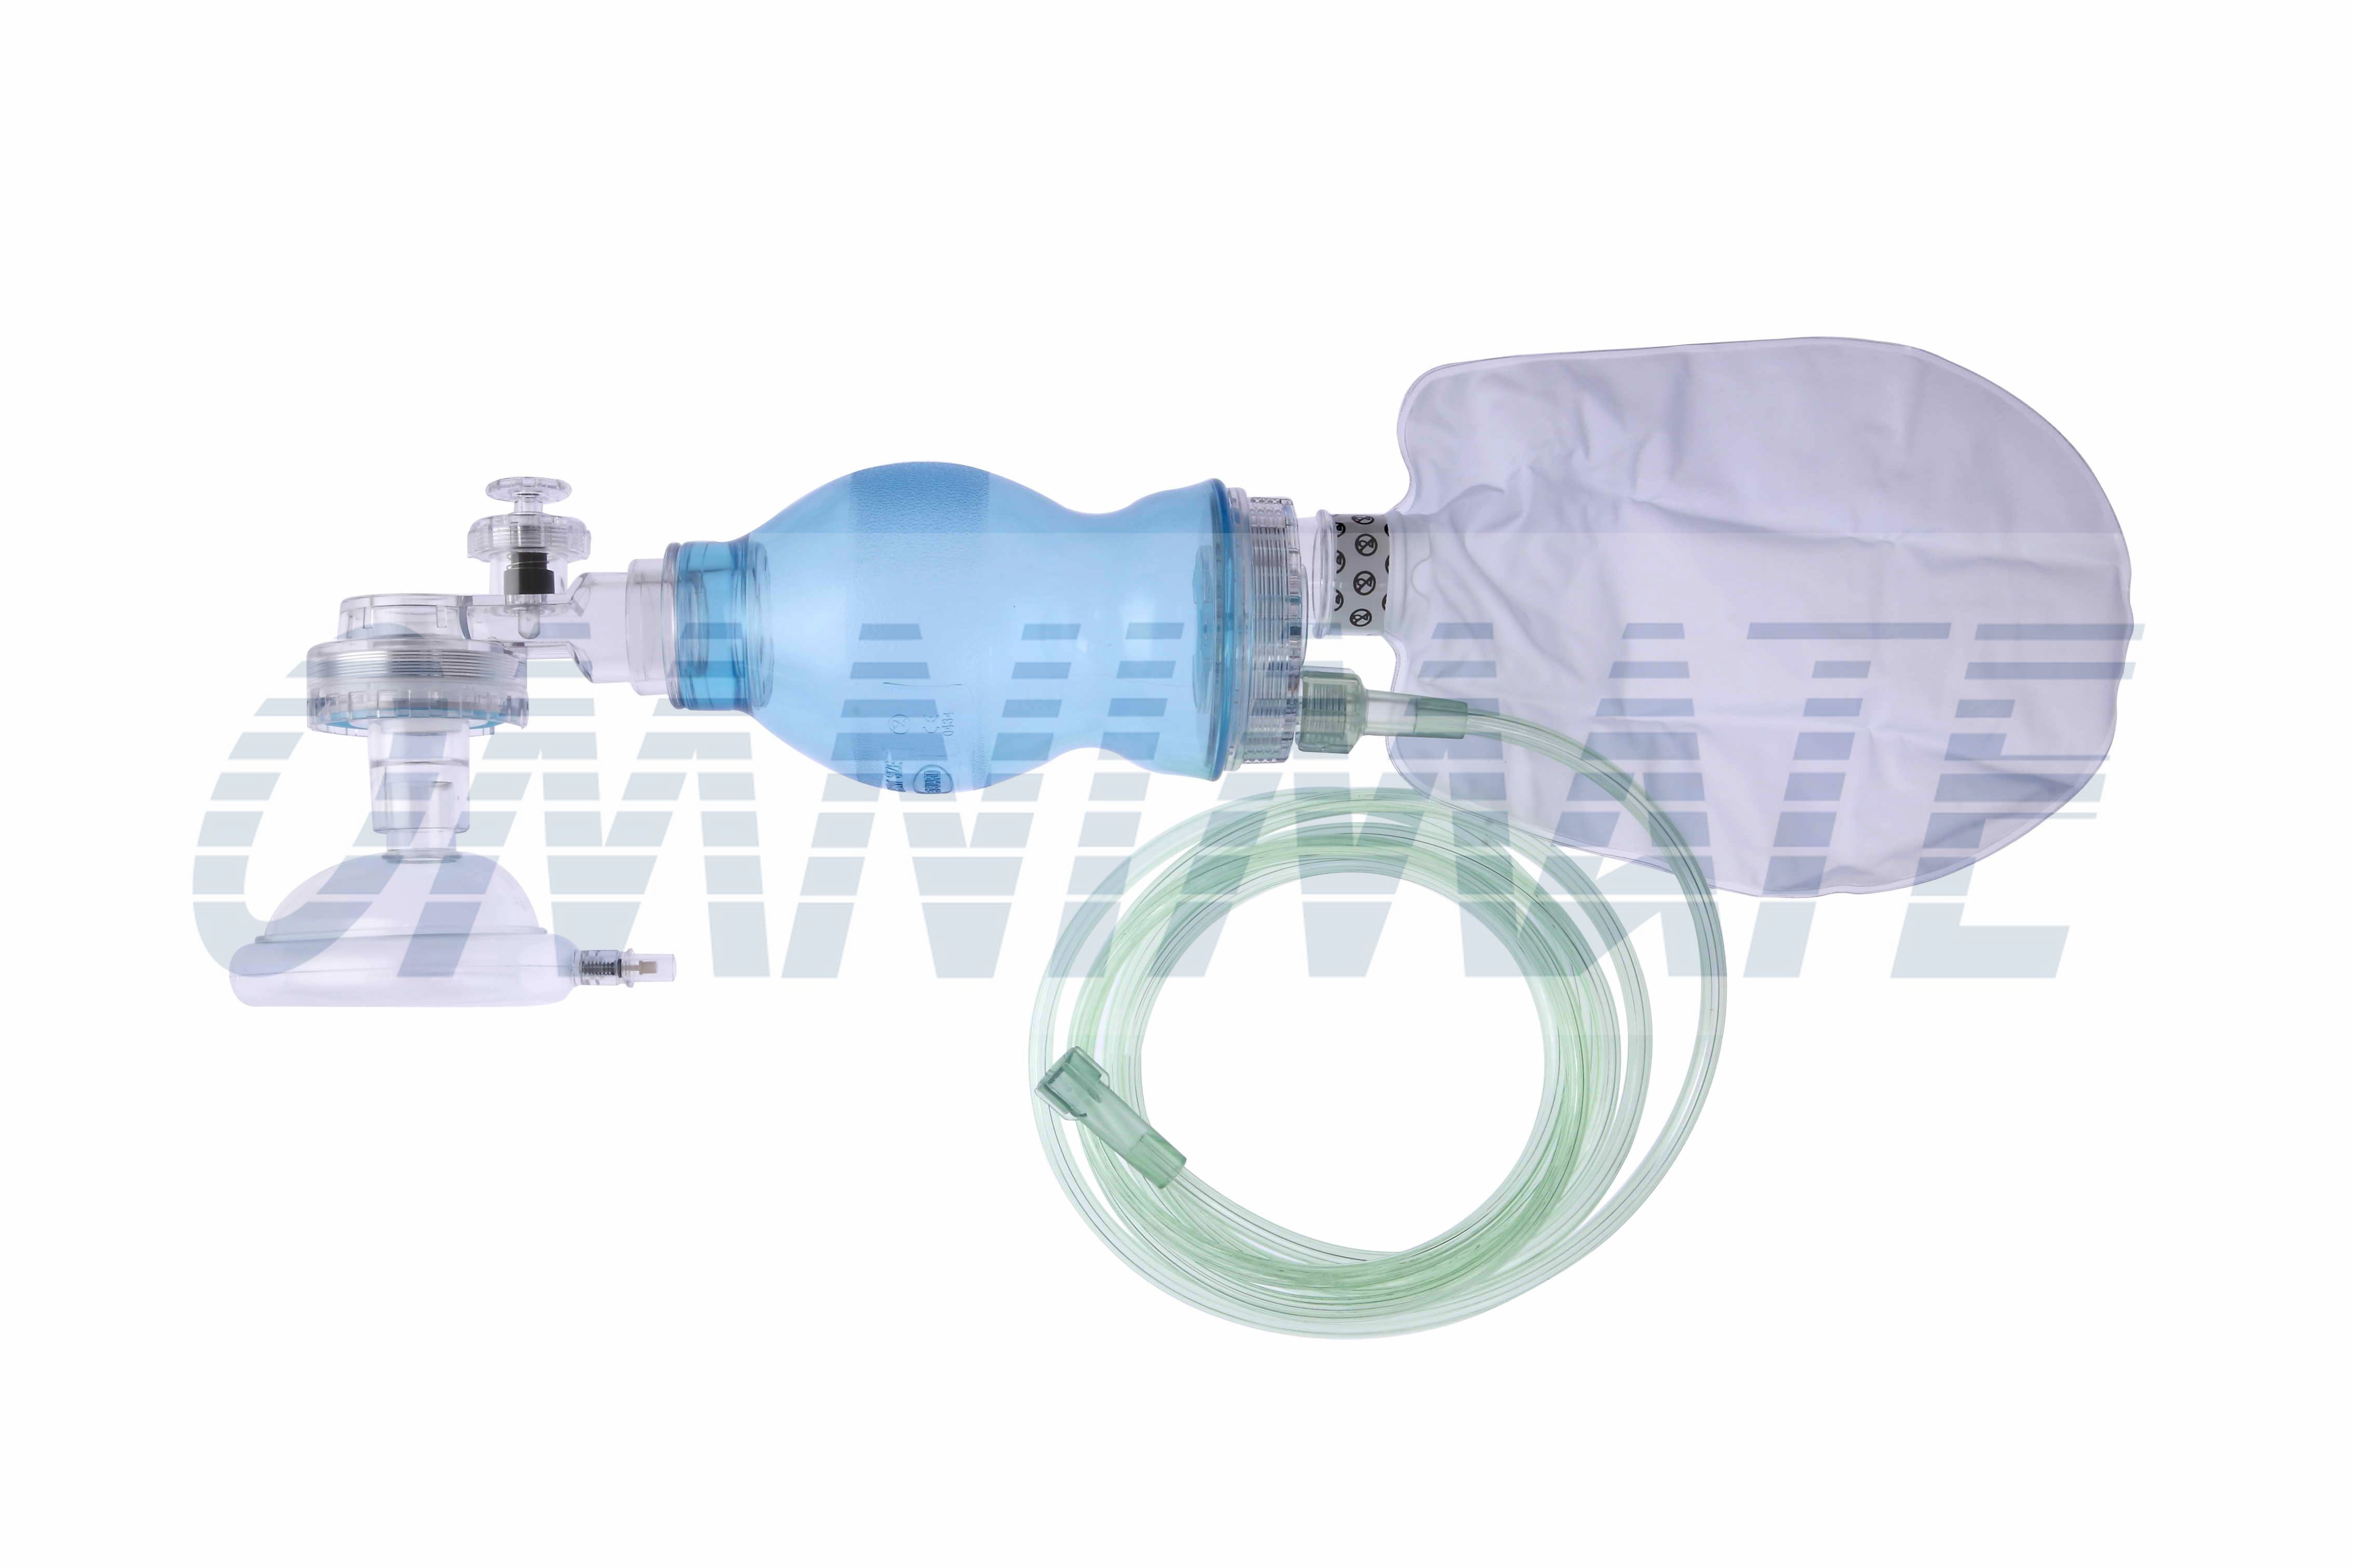 Ambu Bag For Ventilation Resuscitation On White Background Stock Photo,  Picture and Royalty Free Image. Image 15089793.